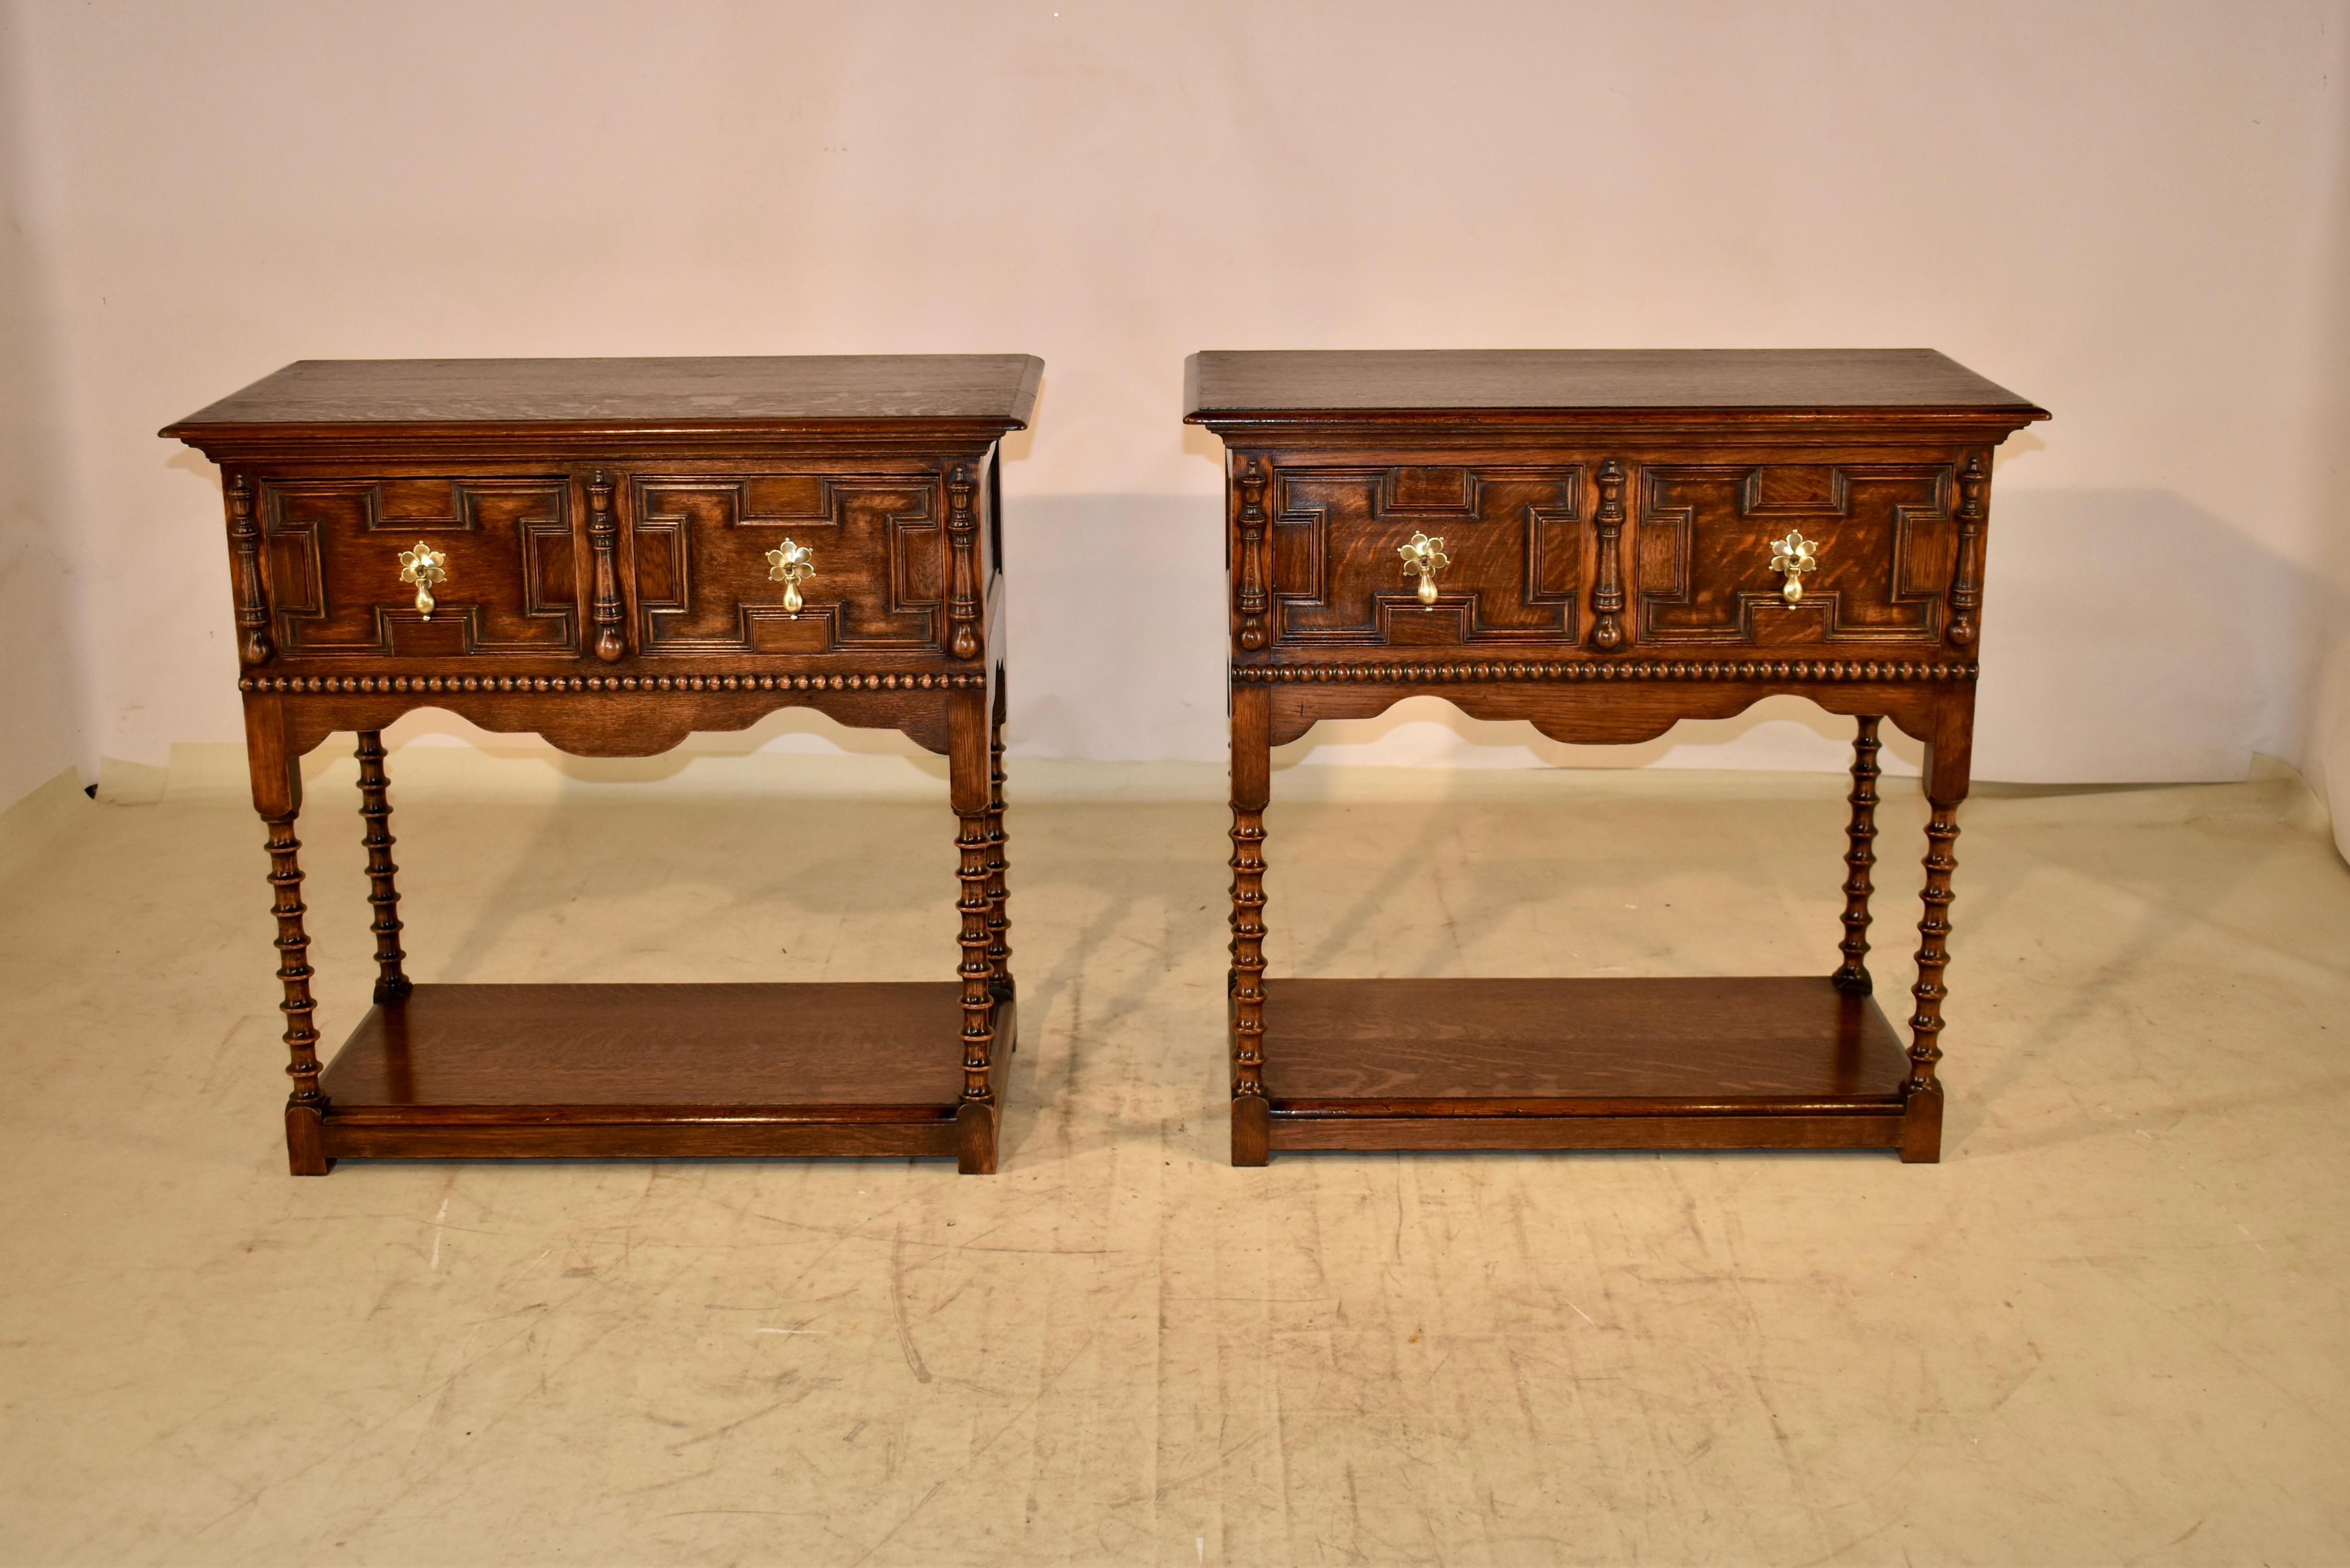 Pair of 19th century oak sideboards from England.  The tops are of pegged construction and have beveled edges.  The tops follow down to paneled sides and two geometrically paneled drawers in the front.  The drawers are flanked with applied turnings